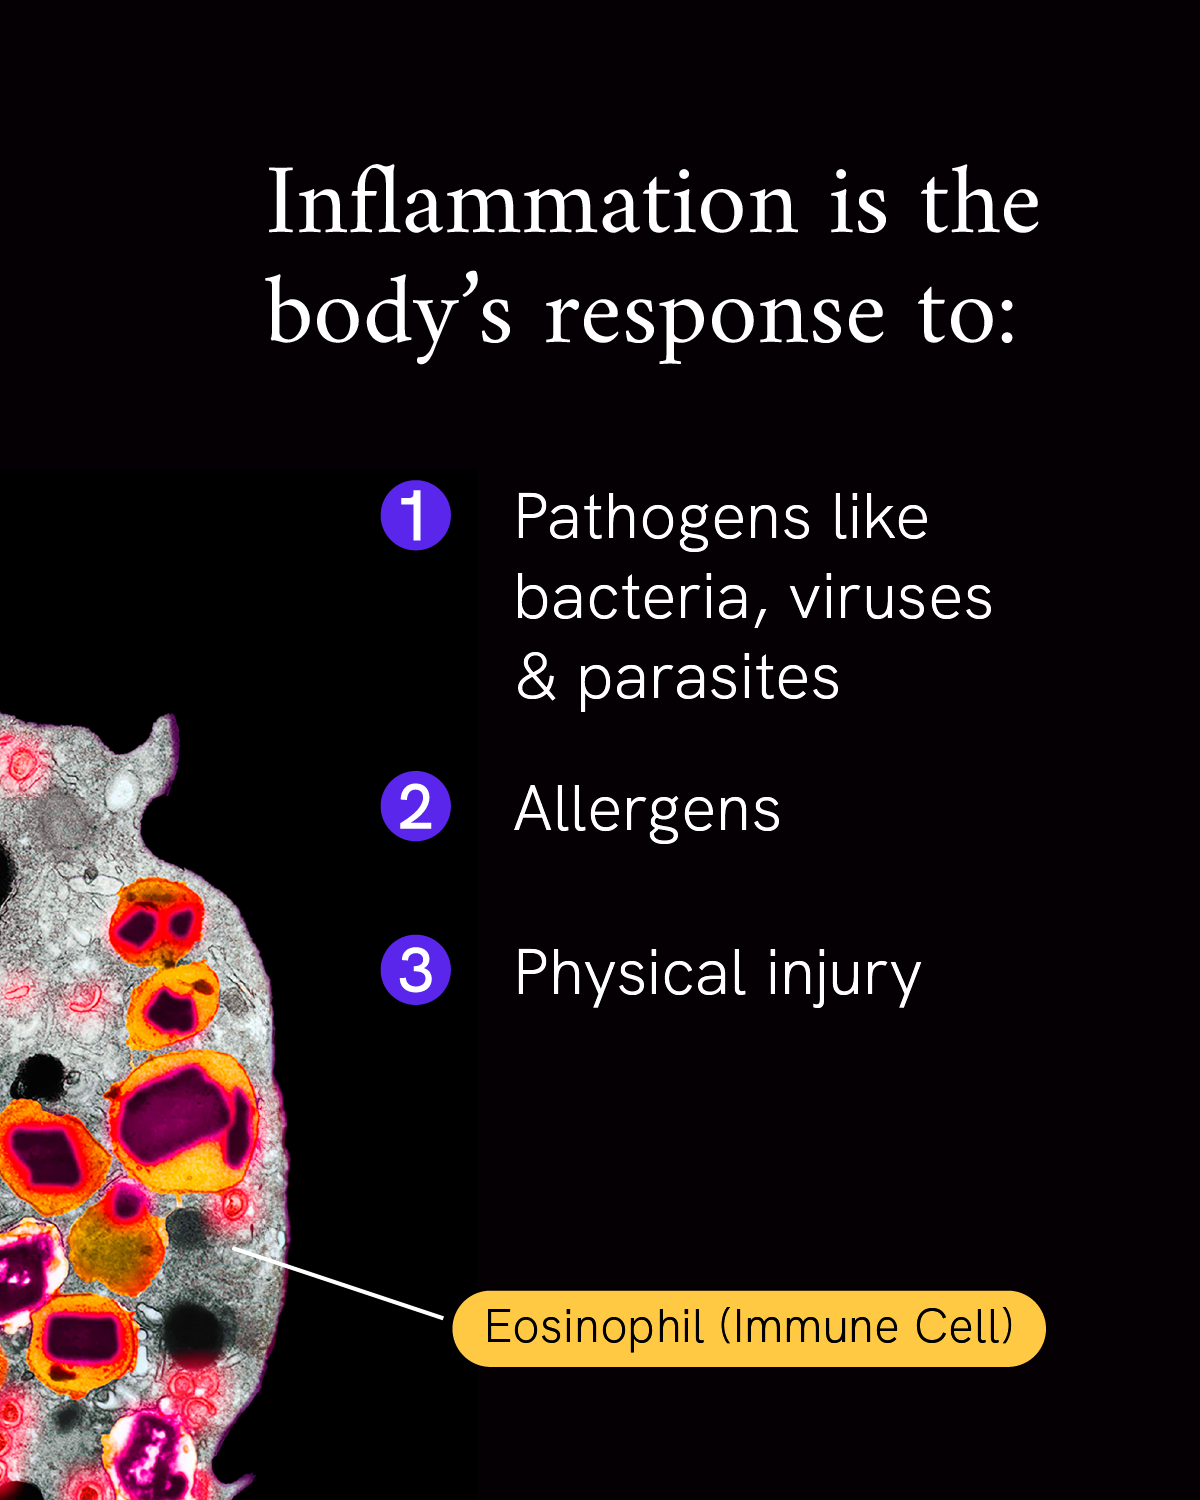 Infographic reads “Inflammation is the body’s response to 1: Pathogens like bacteria, viruses, and parasites 2. Allergens 3. Physical injury.” A photo of a magnified eosinophilia immune cell using orange, pink and red colors to highlight different parts of the cell accompanies the text.